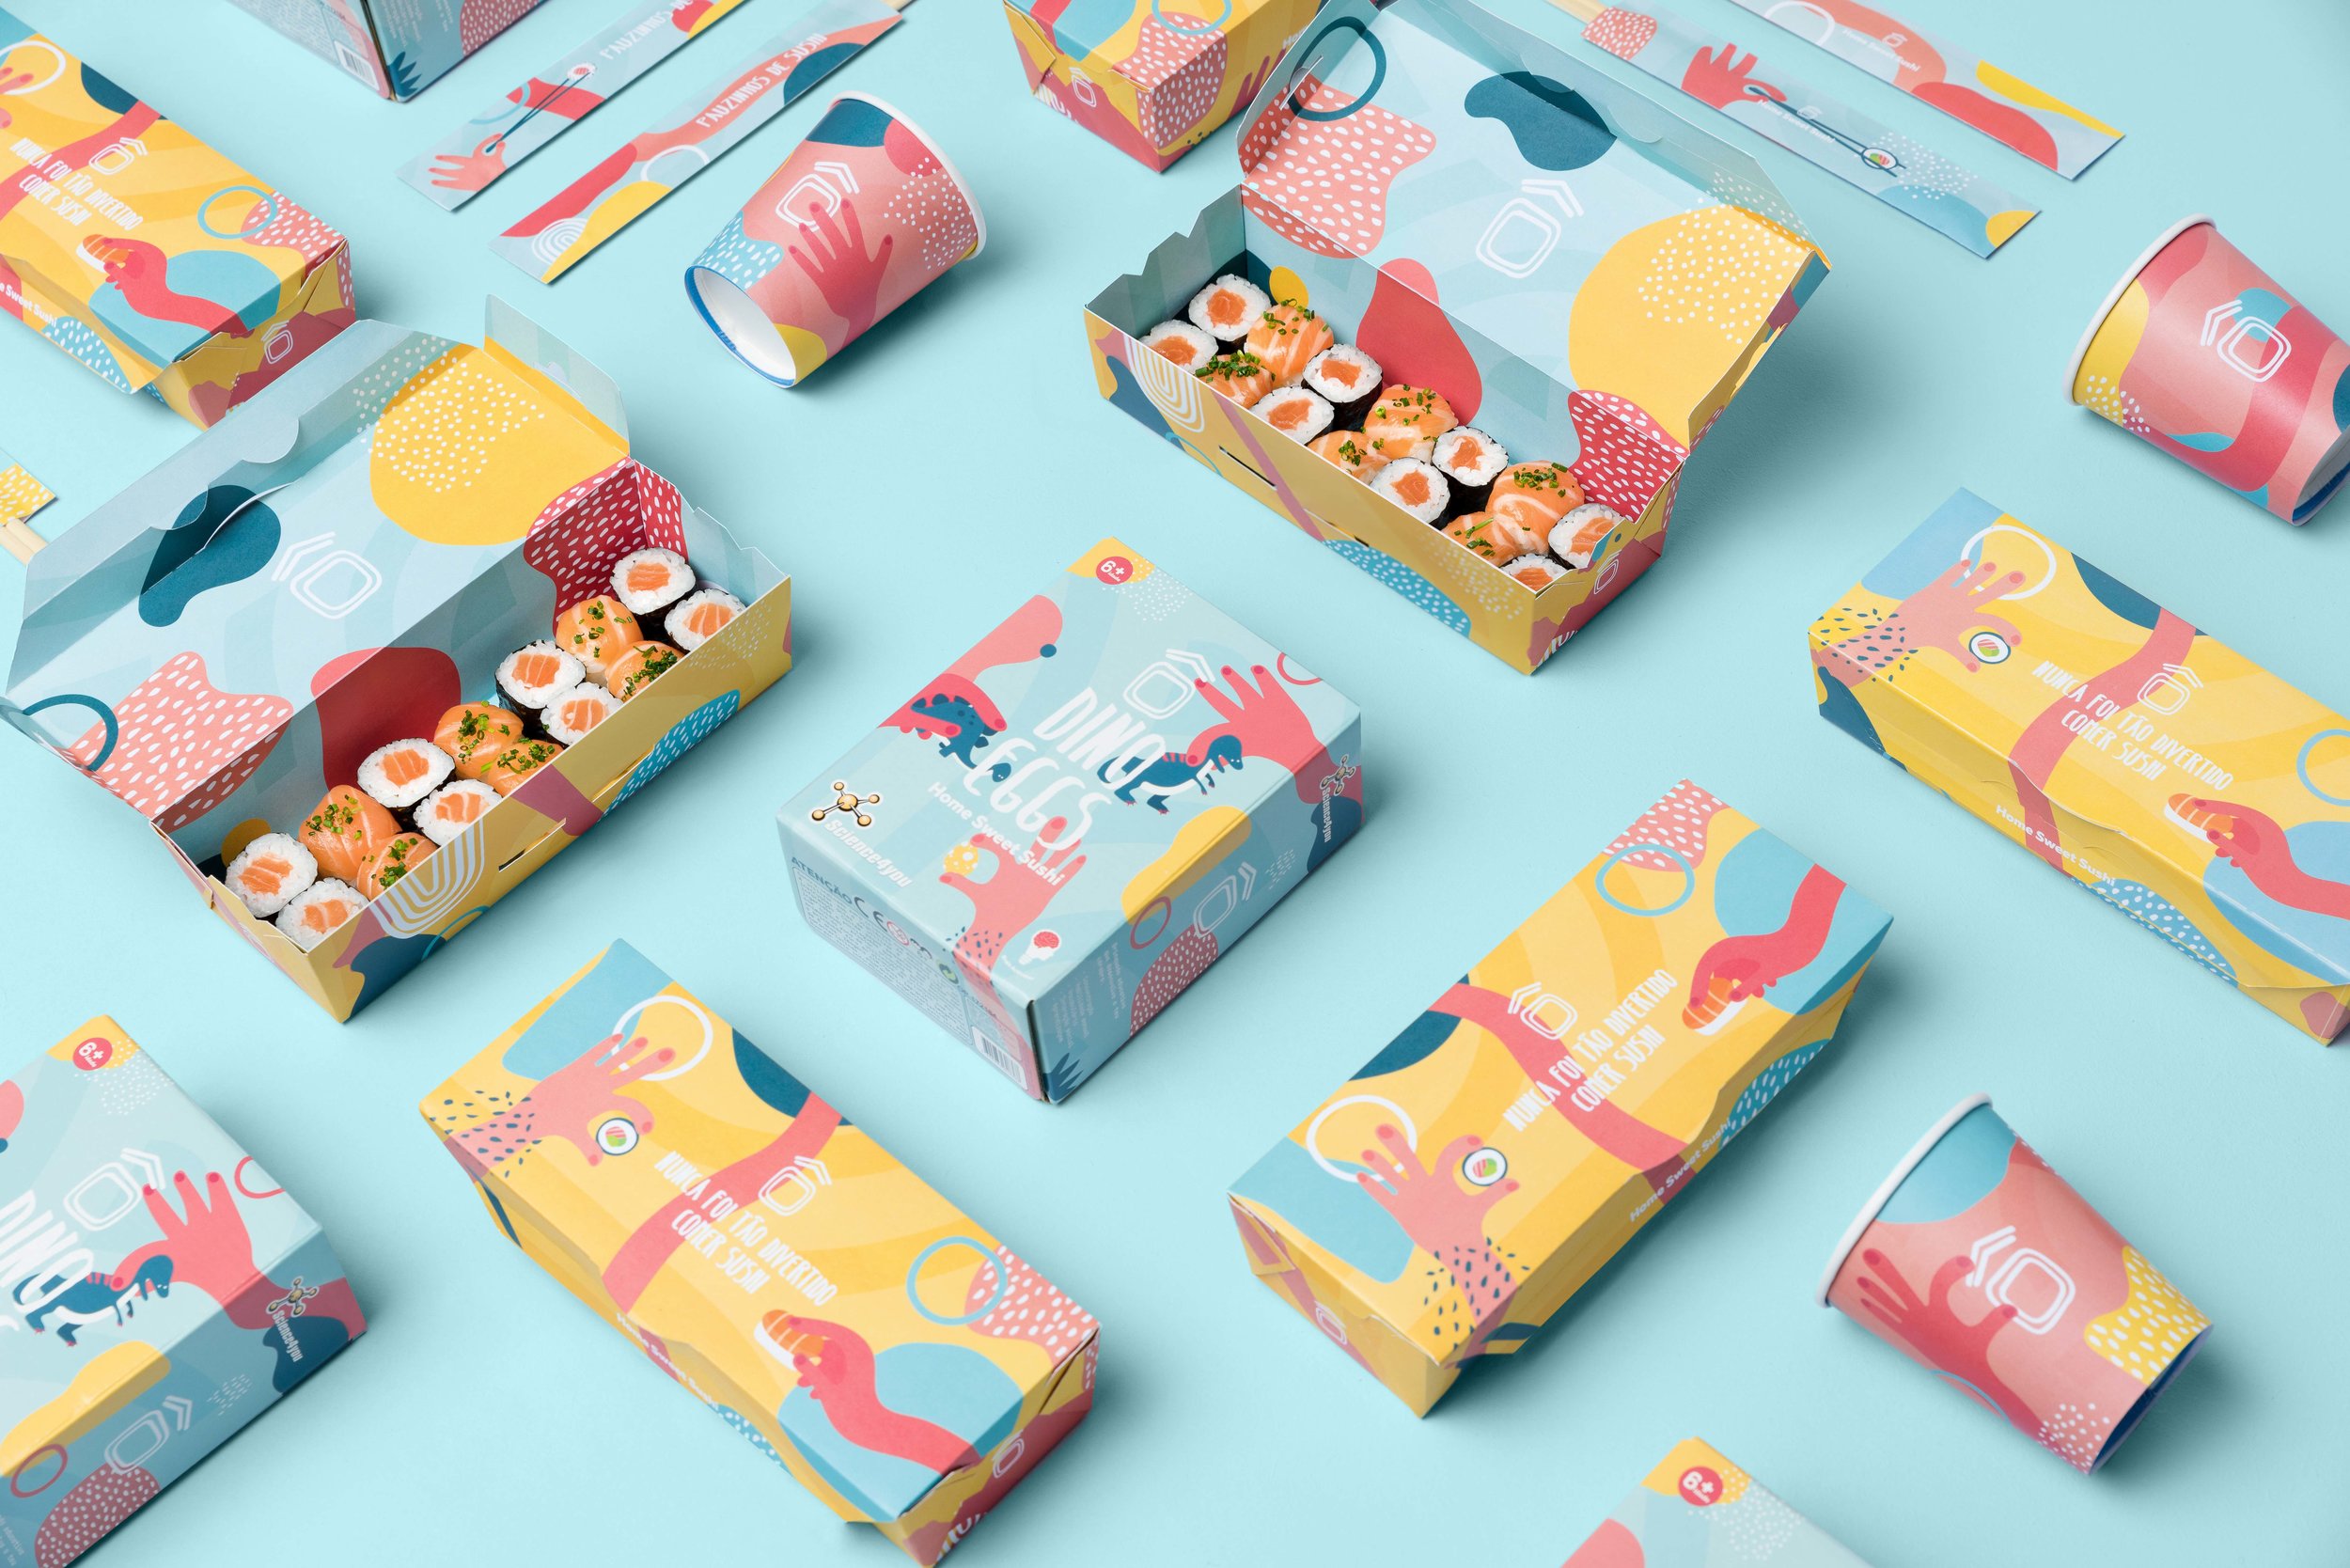 Portuguese Sushi Menu and Packaging Design for Kids